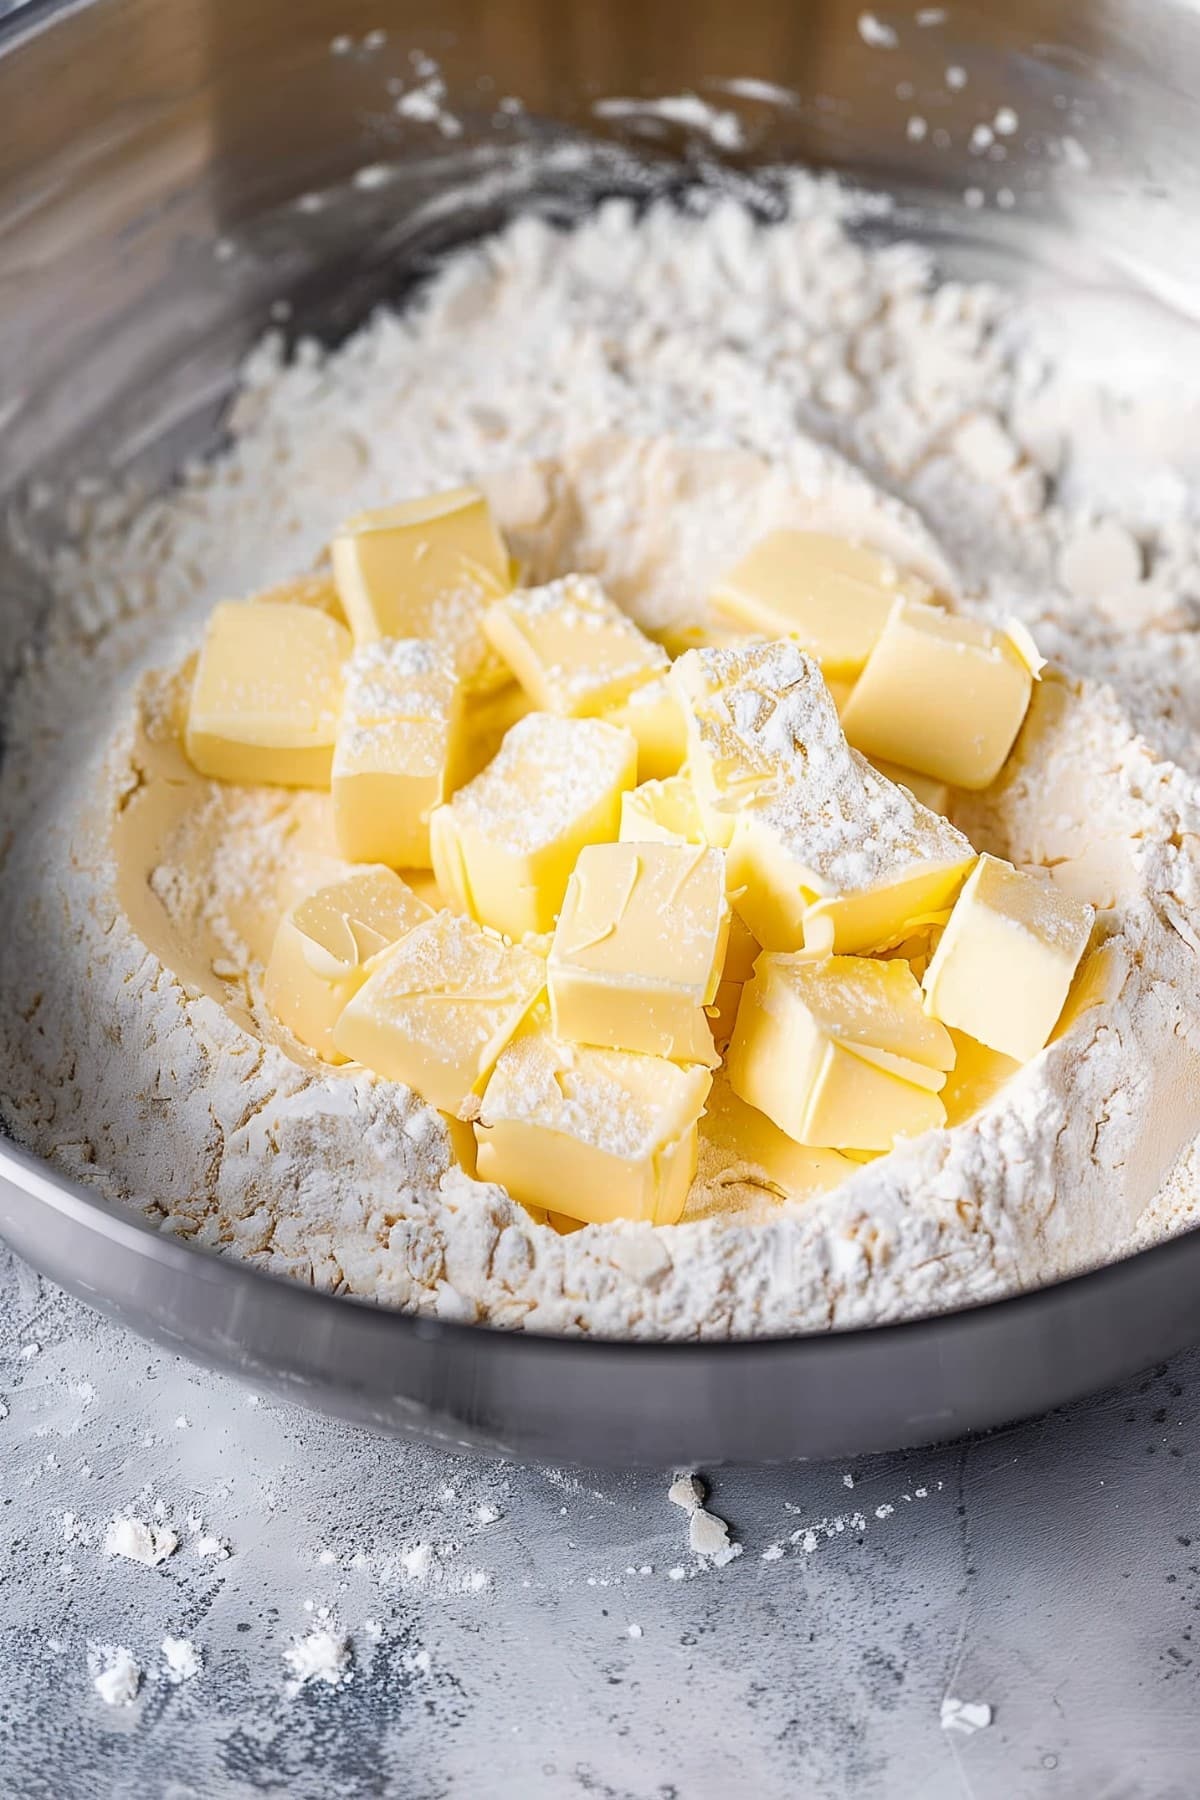 Cubed butter and flour in a mixing bowl